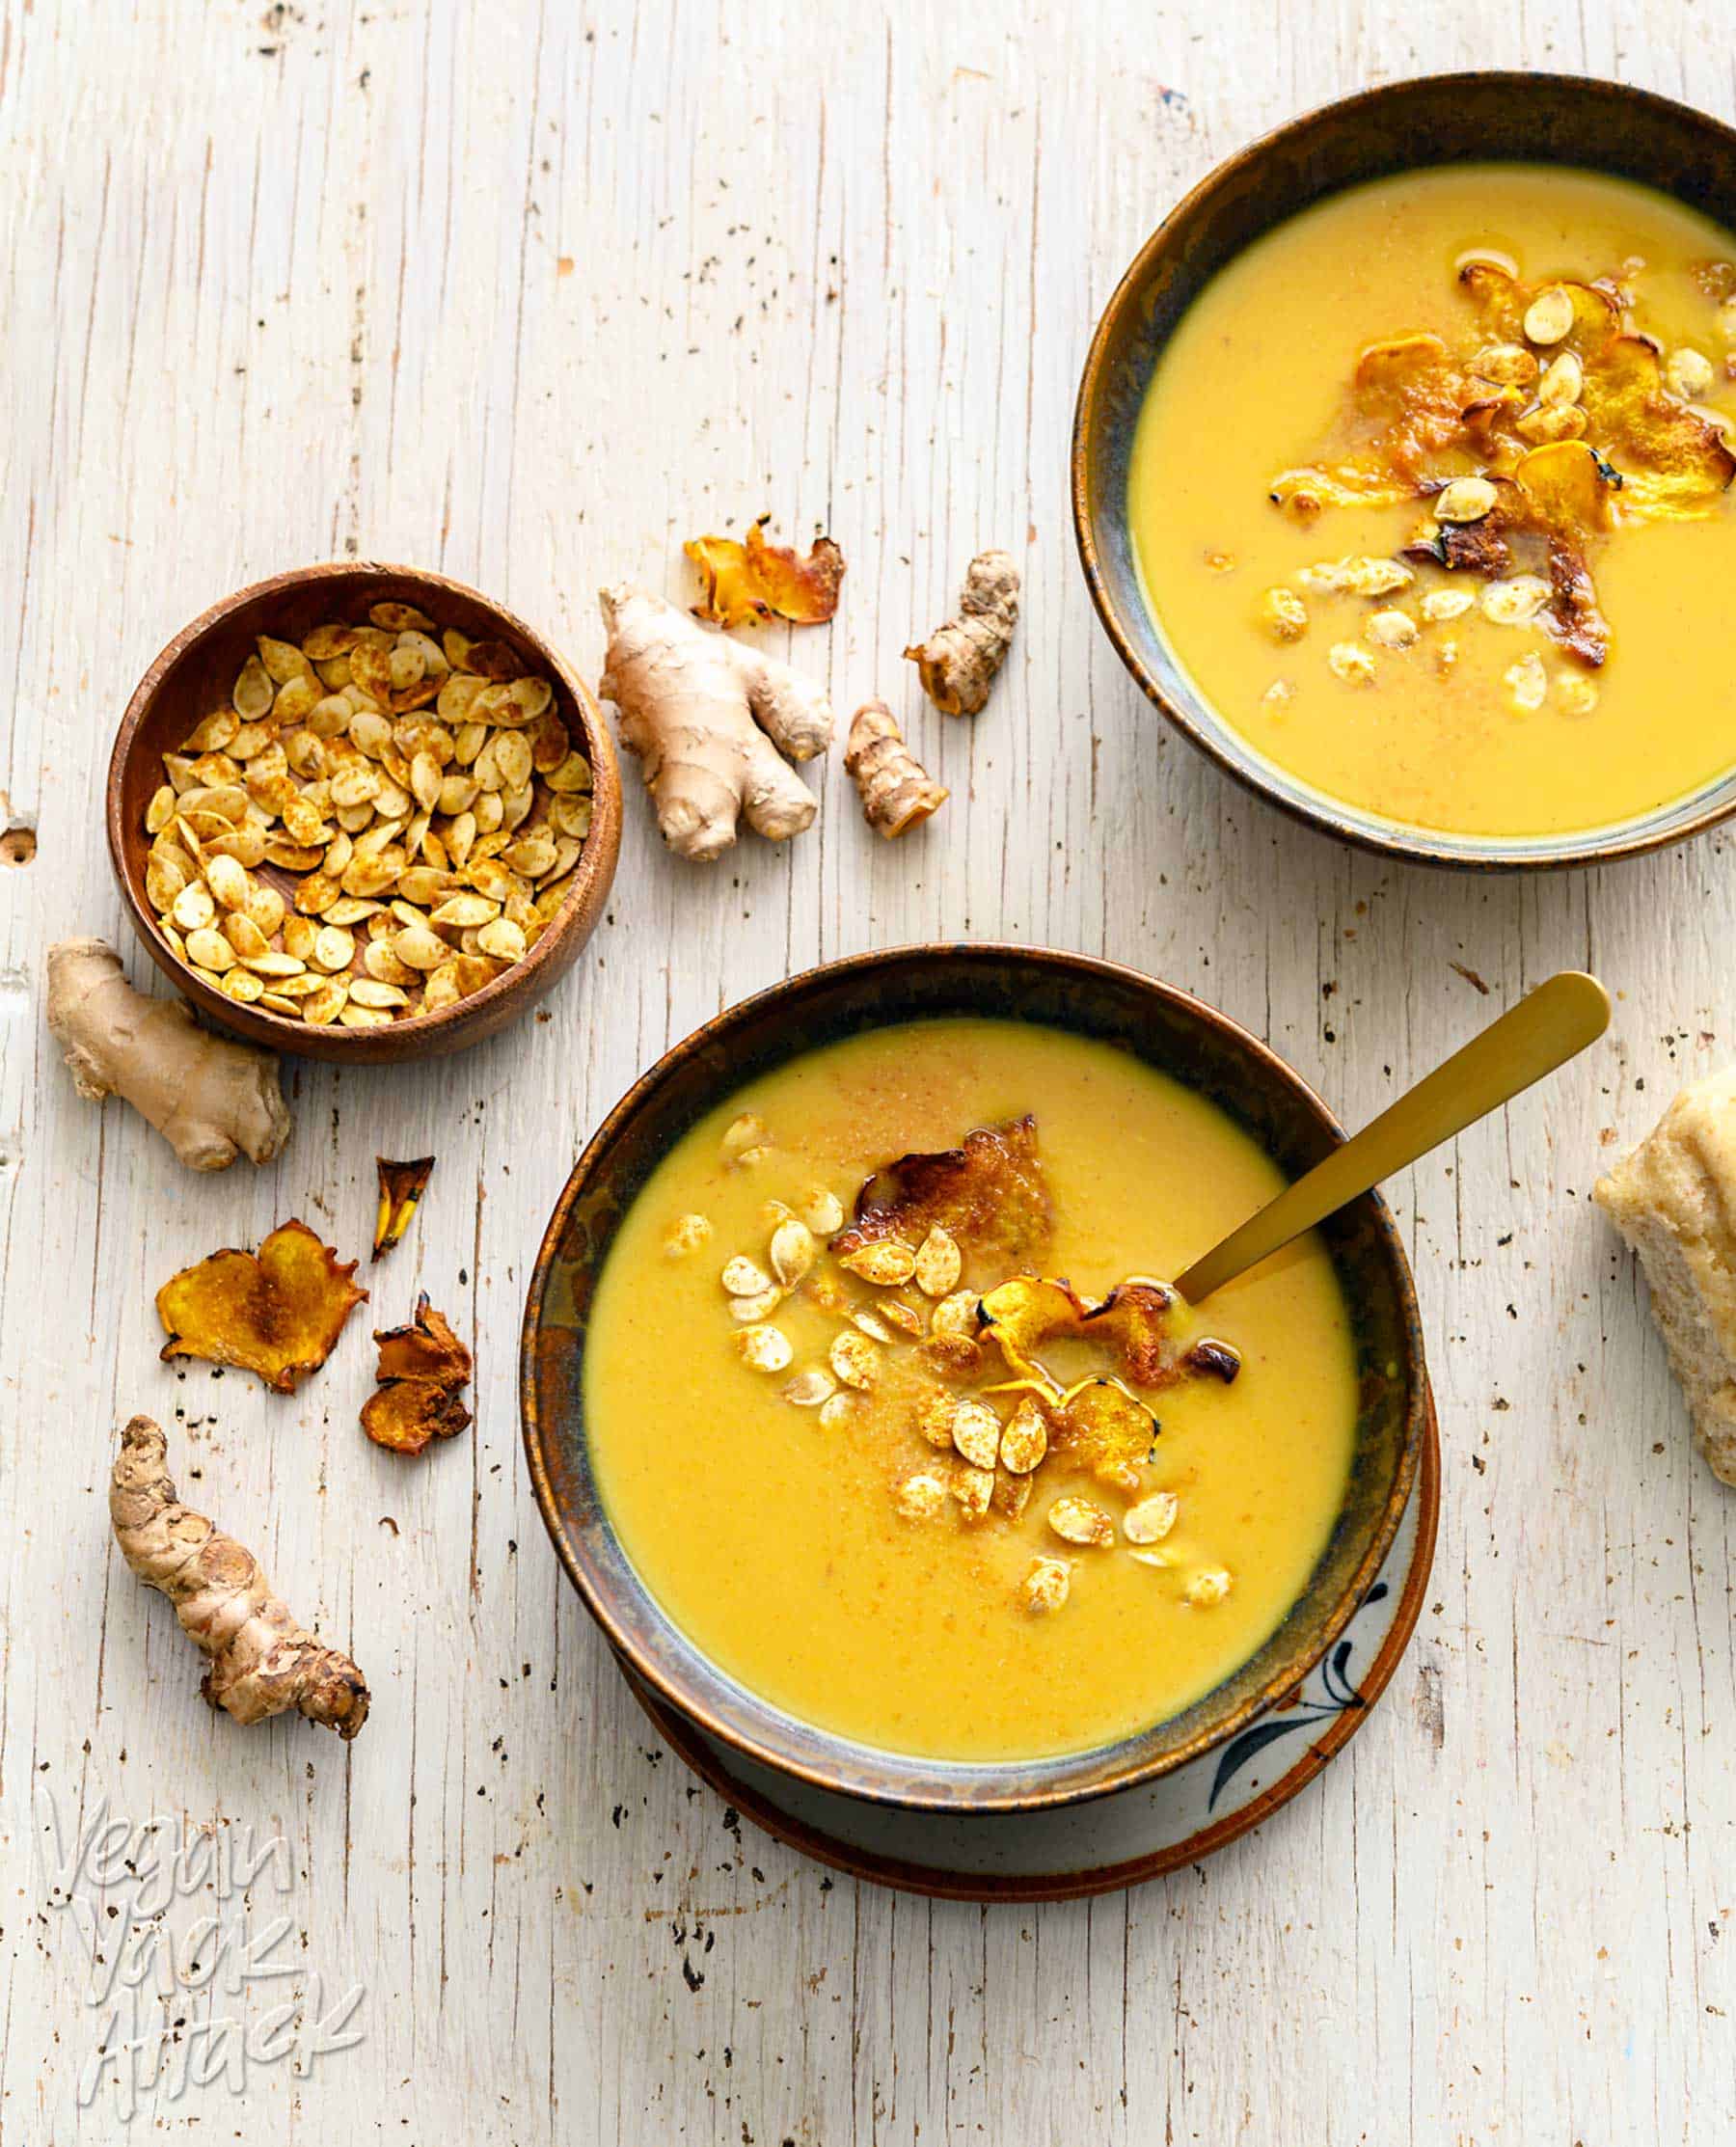 Two bowls of ginger turmeric squash soup with toasted seeds and a bread roll